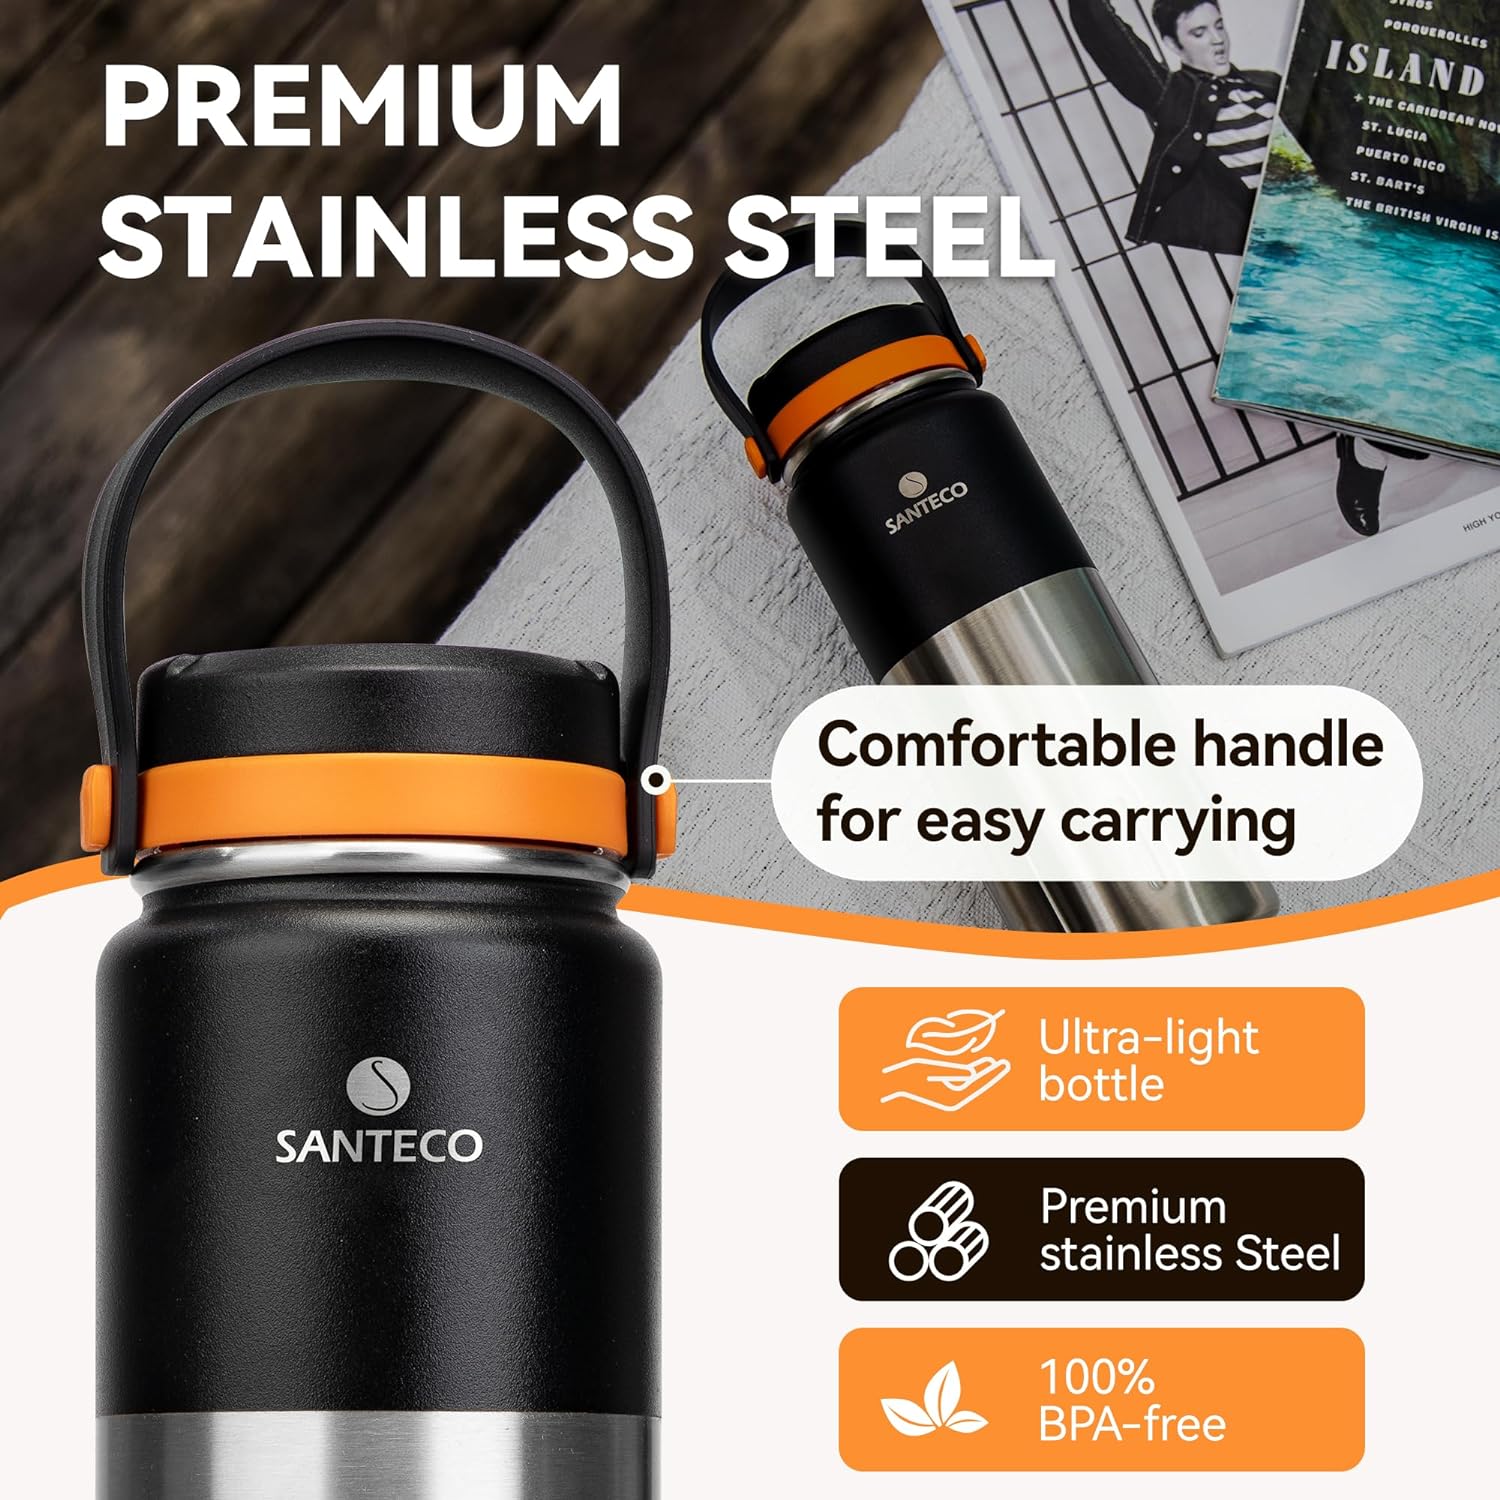 SANTECO 17oz Insulated Water Bottle with Handle, Stainless Steel Sports Water Bottles, Wide Mouth Leak-Proof Double Wall Travel Mug Cold & Hot Water Cup for GYM, Riding, Camping, School